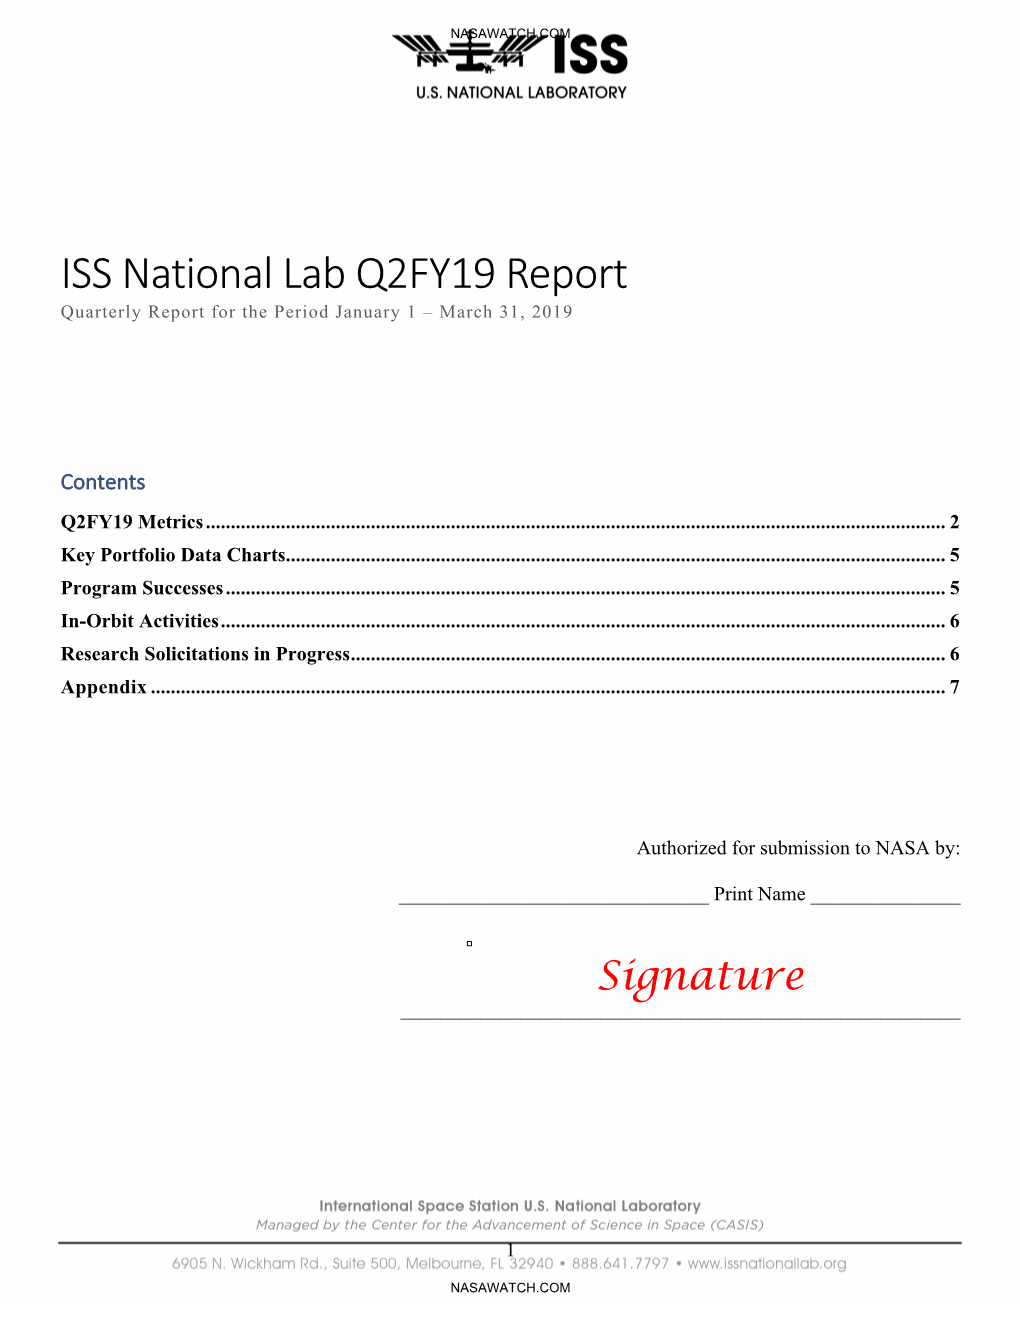 ISS National Lab Q2FY19 Report Quarterly Report for the Period January 1 – March 31, 2019